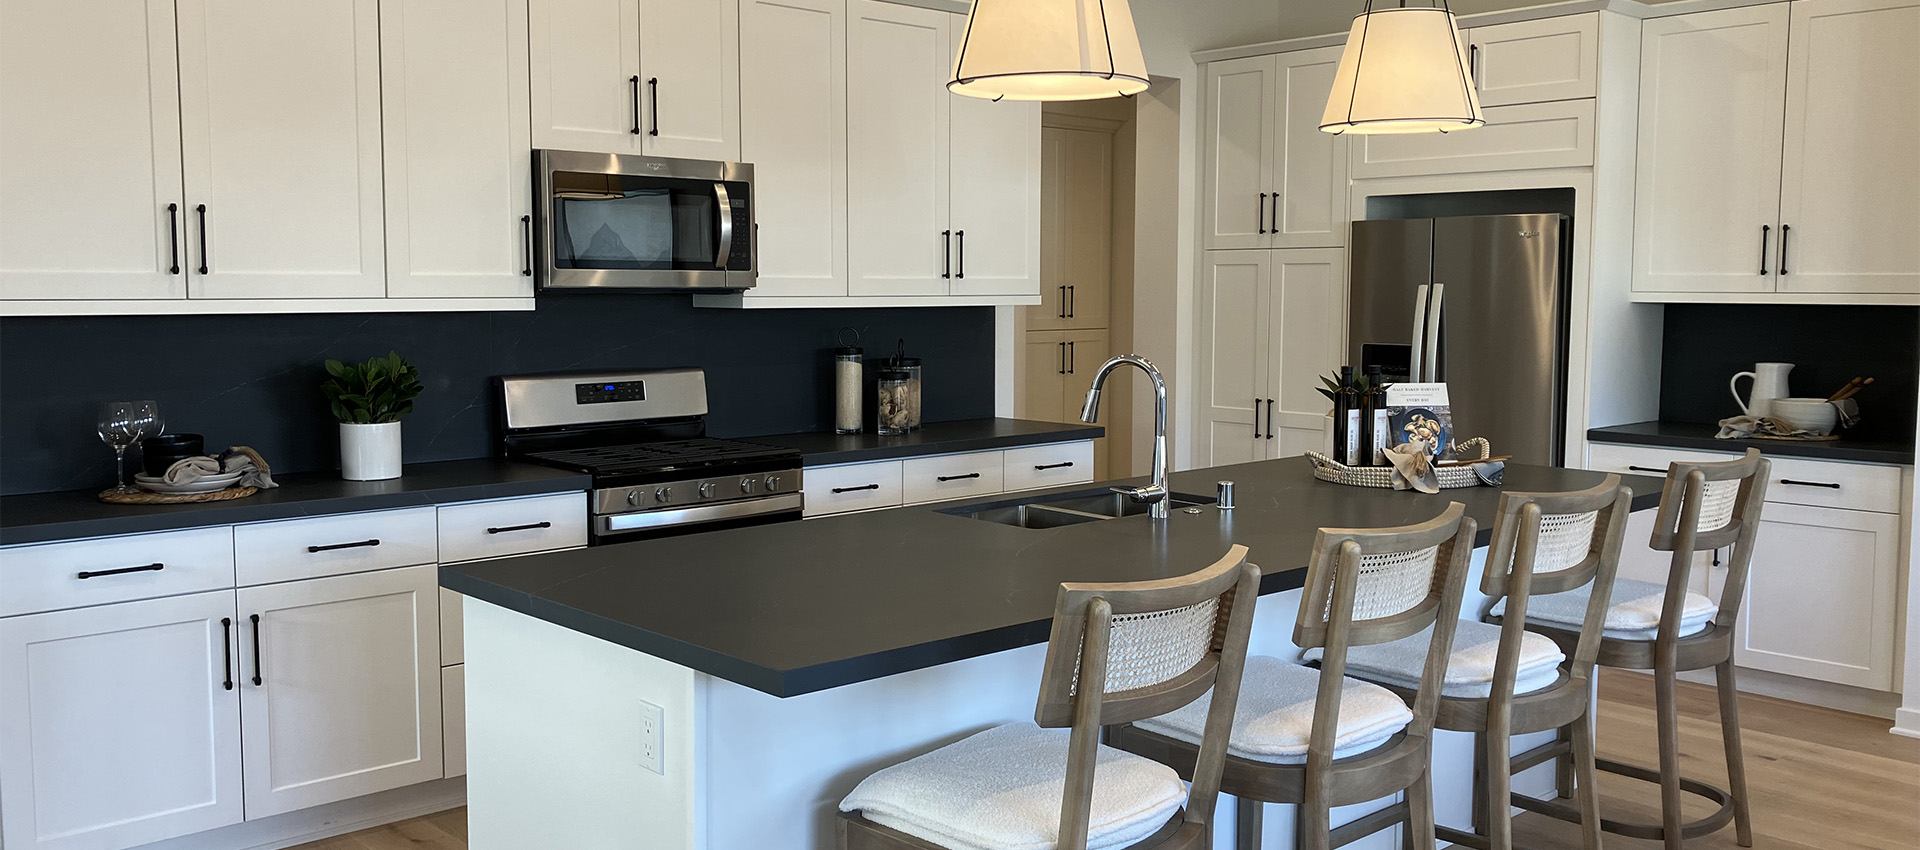 Image of a kitchen in a model home at Haddington 